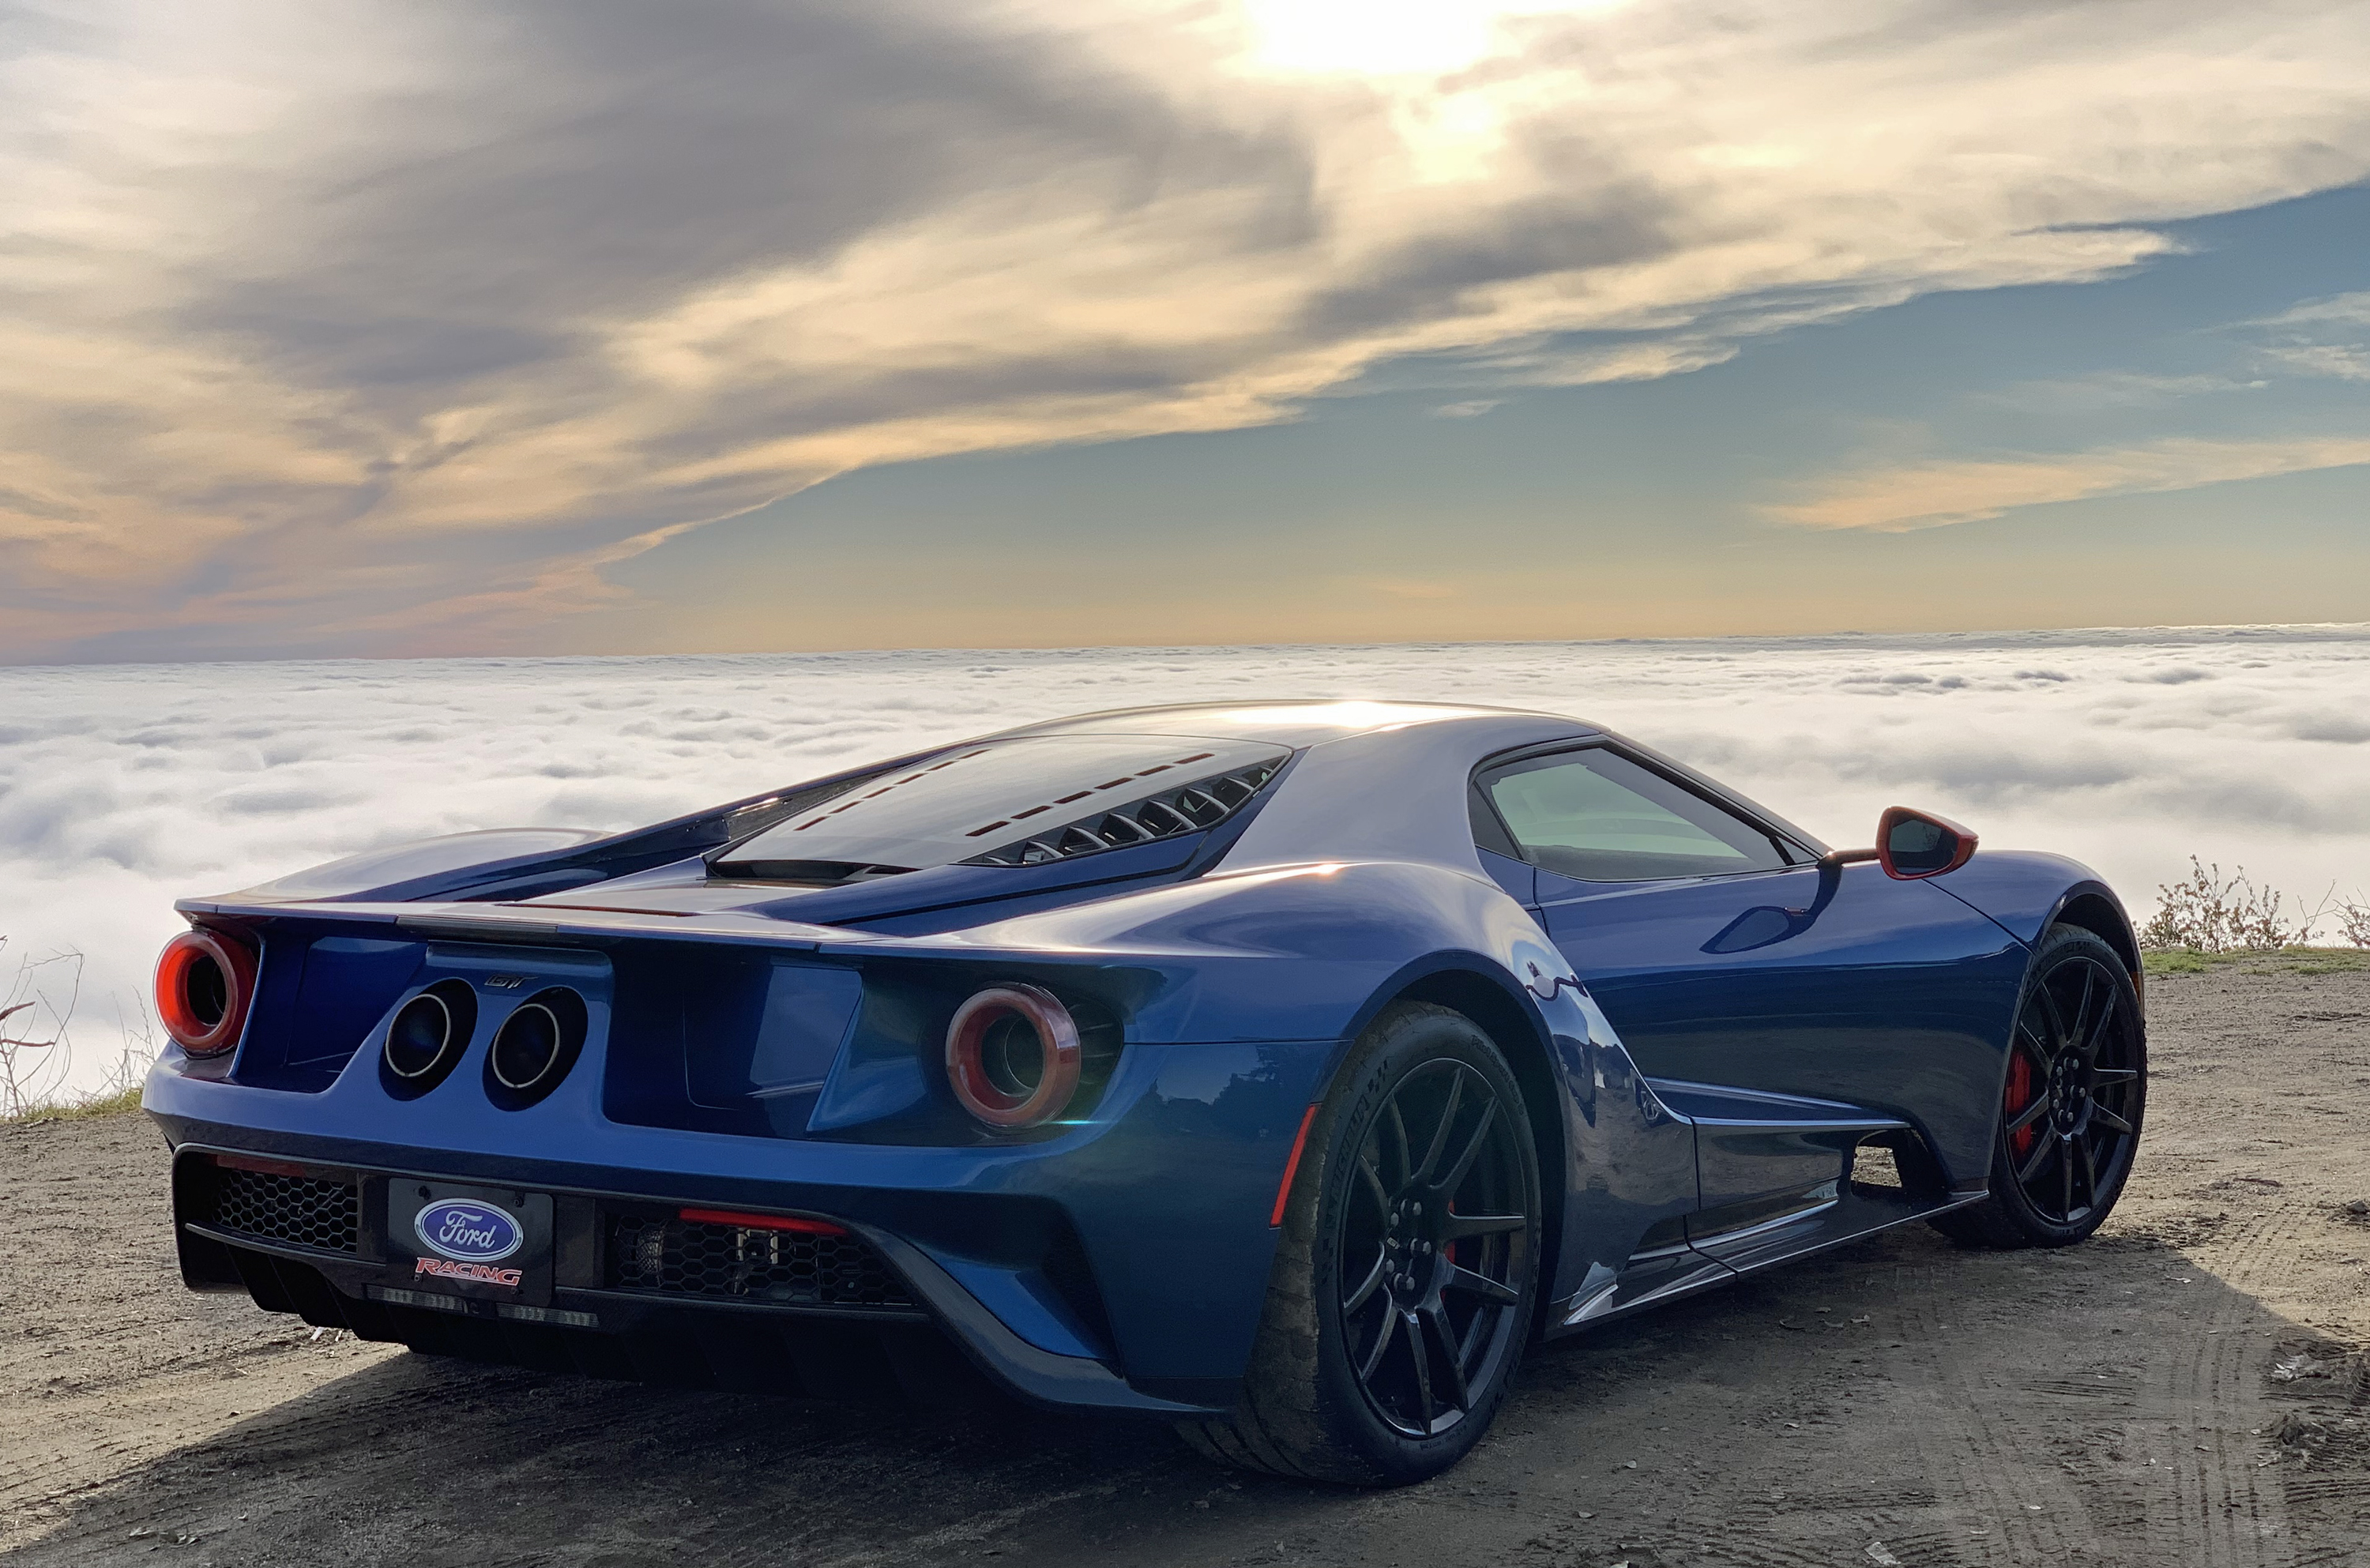 2019 Ford GT Carbon Series Palomar Clouds